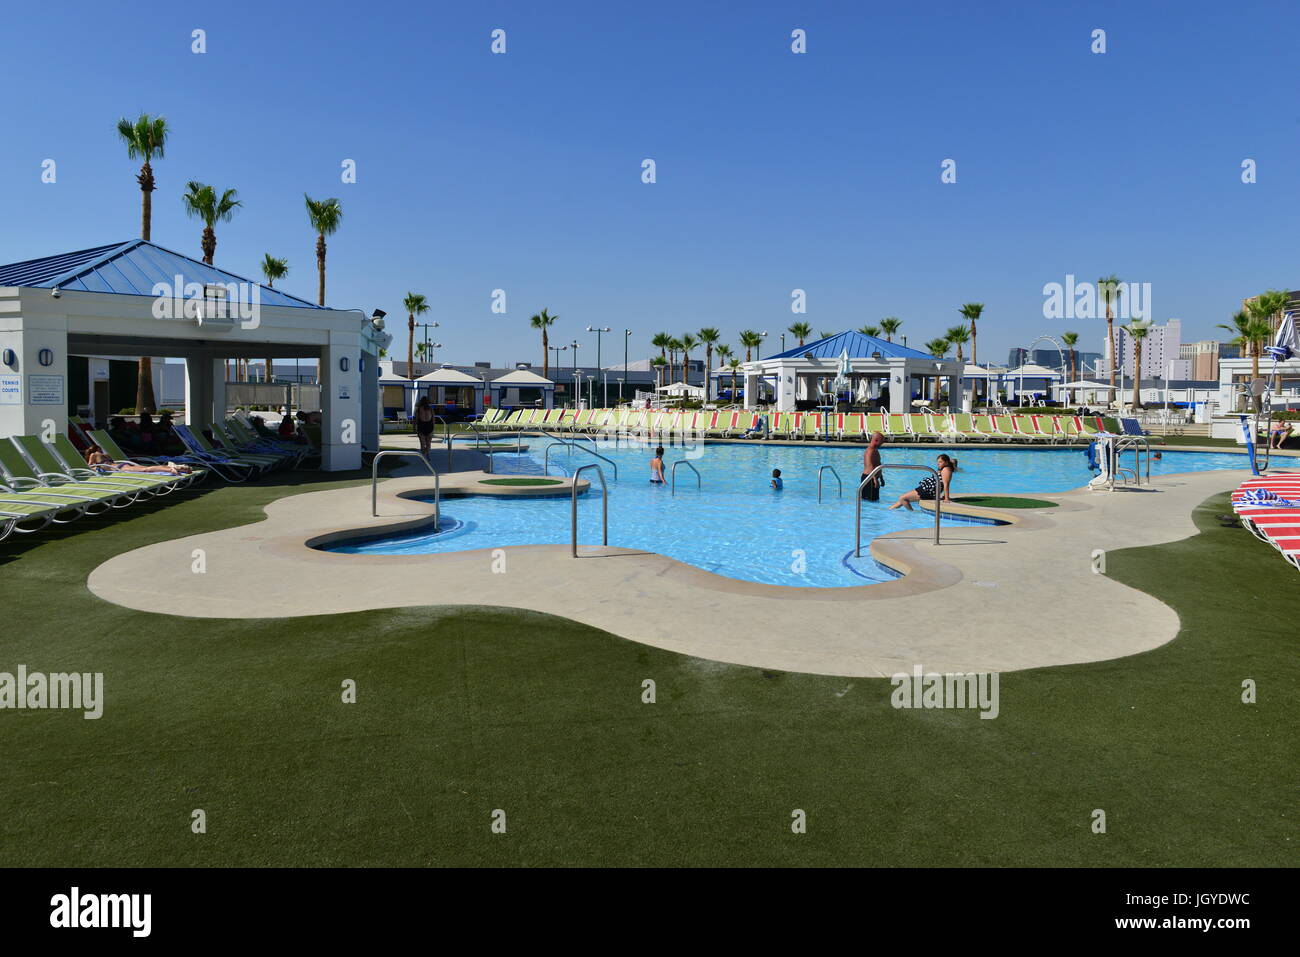 The pool at a Las Vegas hotel early in the morning Stock Photo